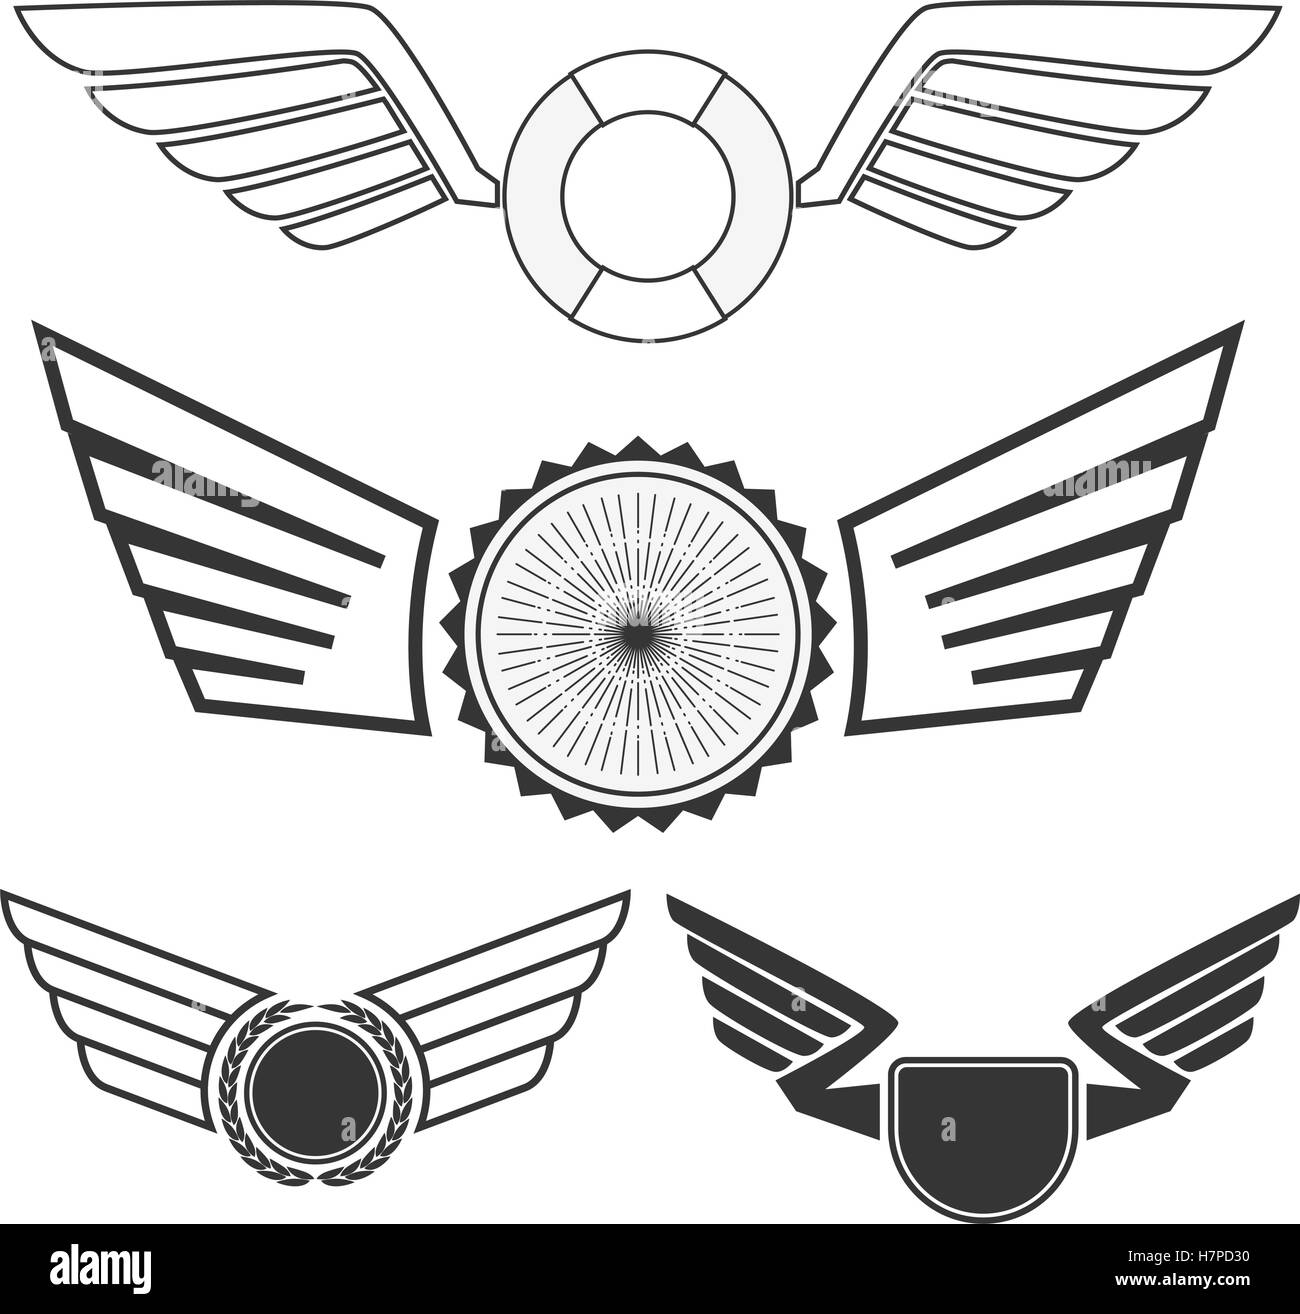 Emblems with wings Stock Vector